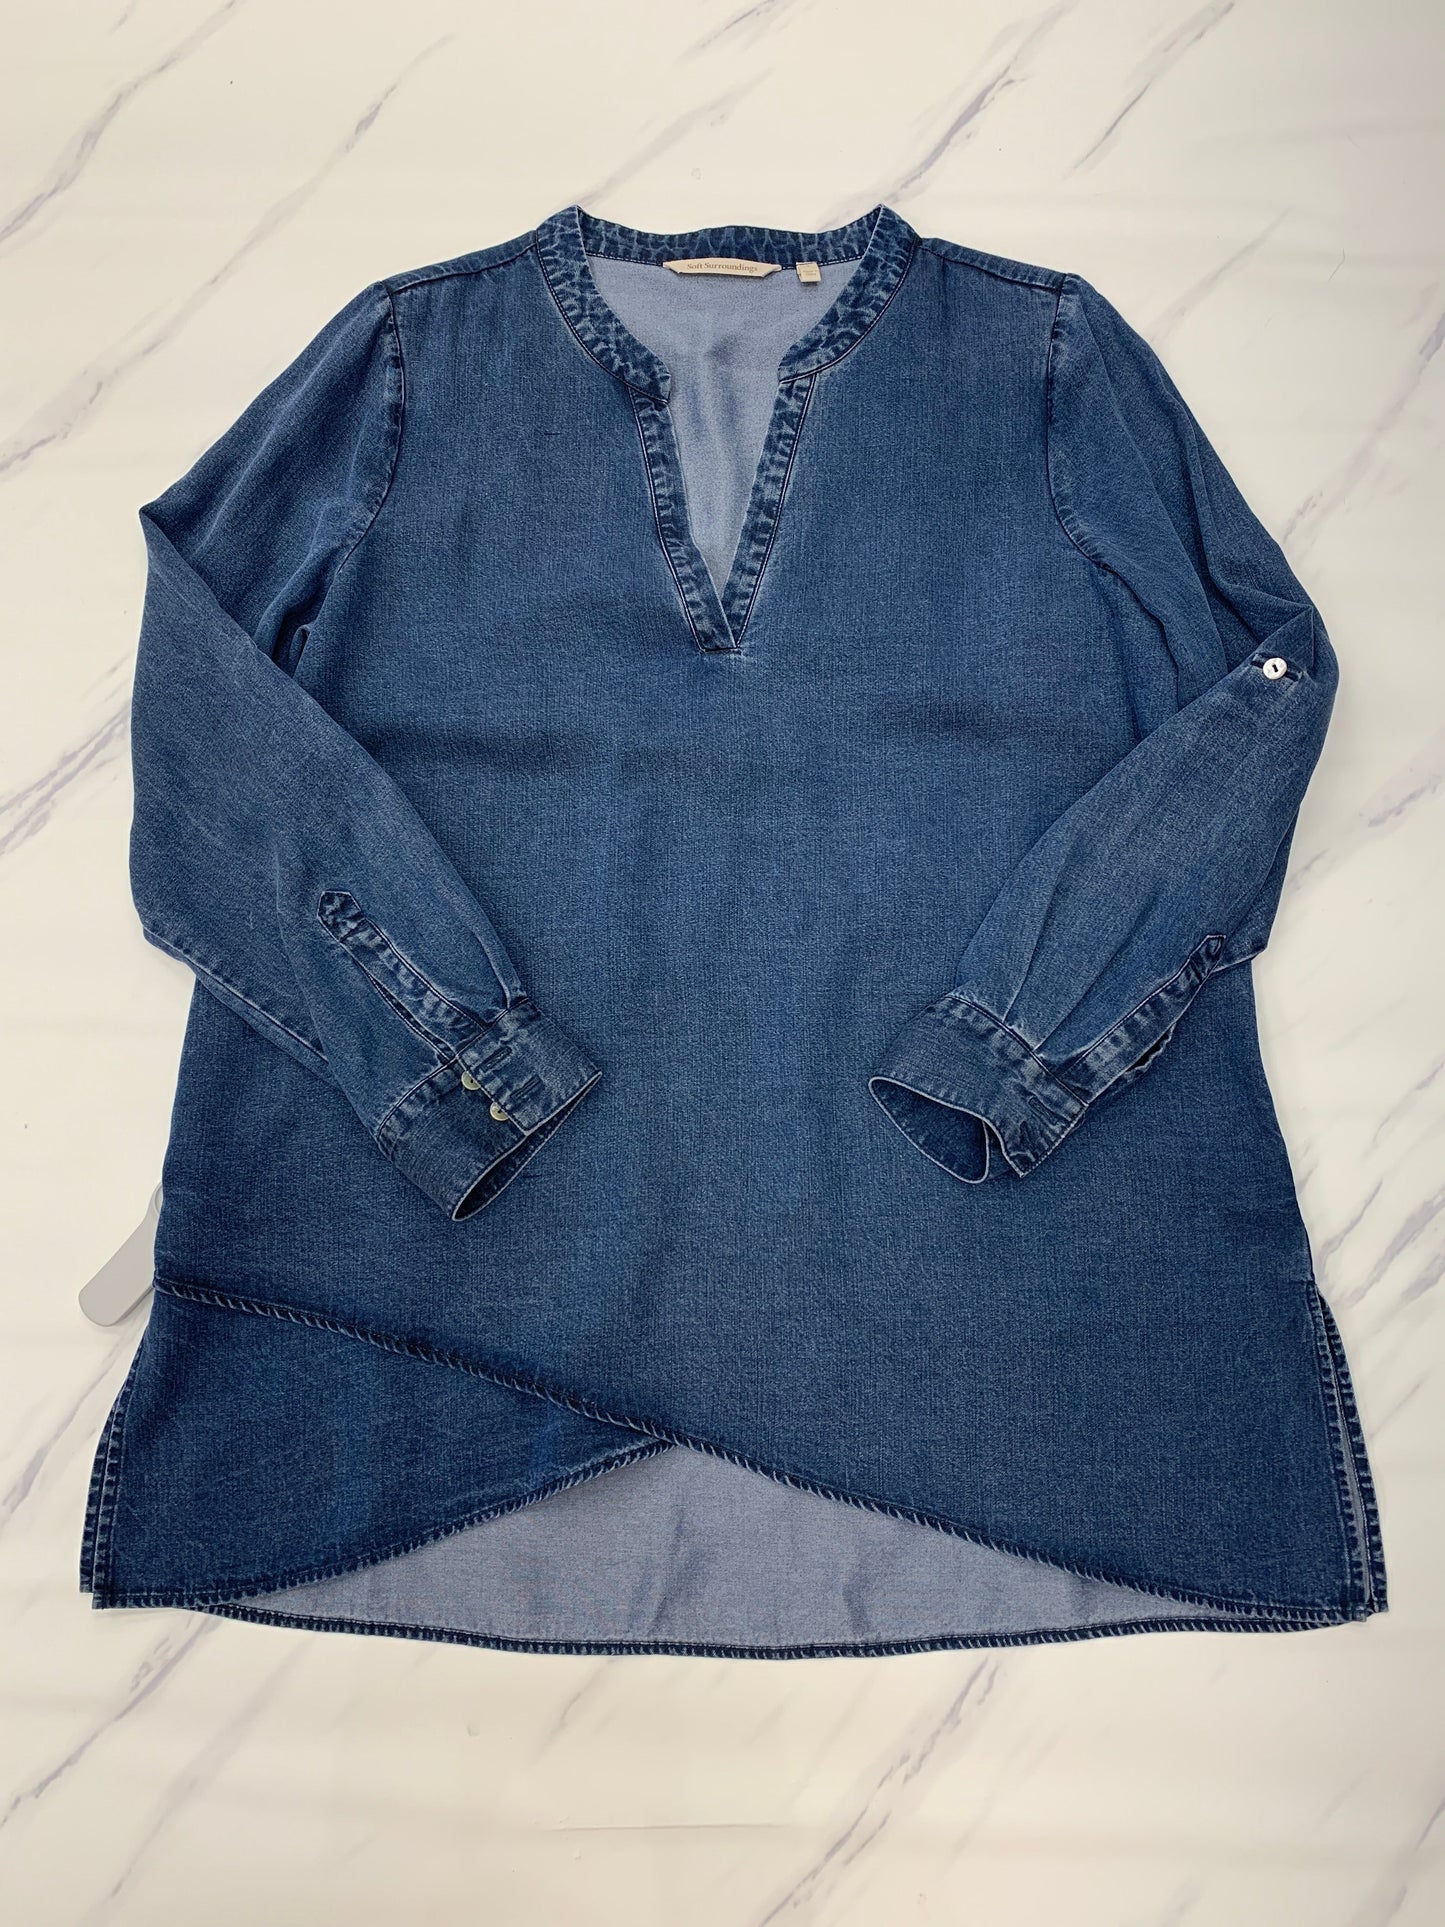 Blue Top Long Sleeve Soft Surroundings, Size S